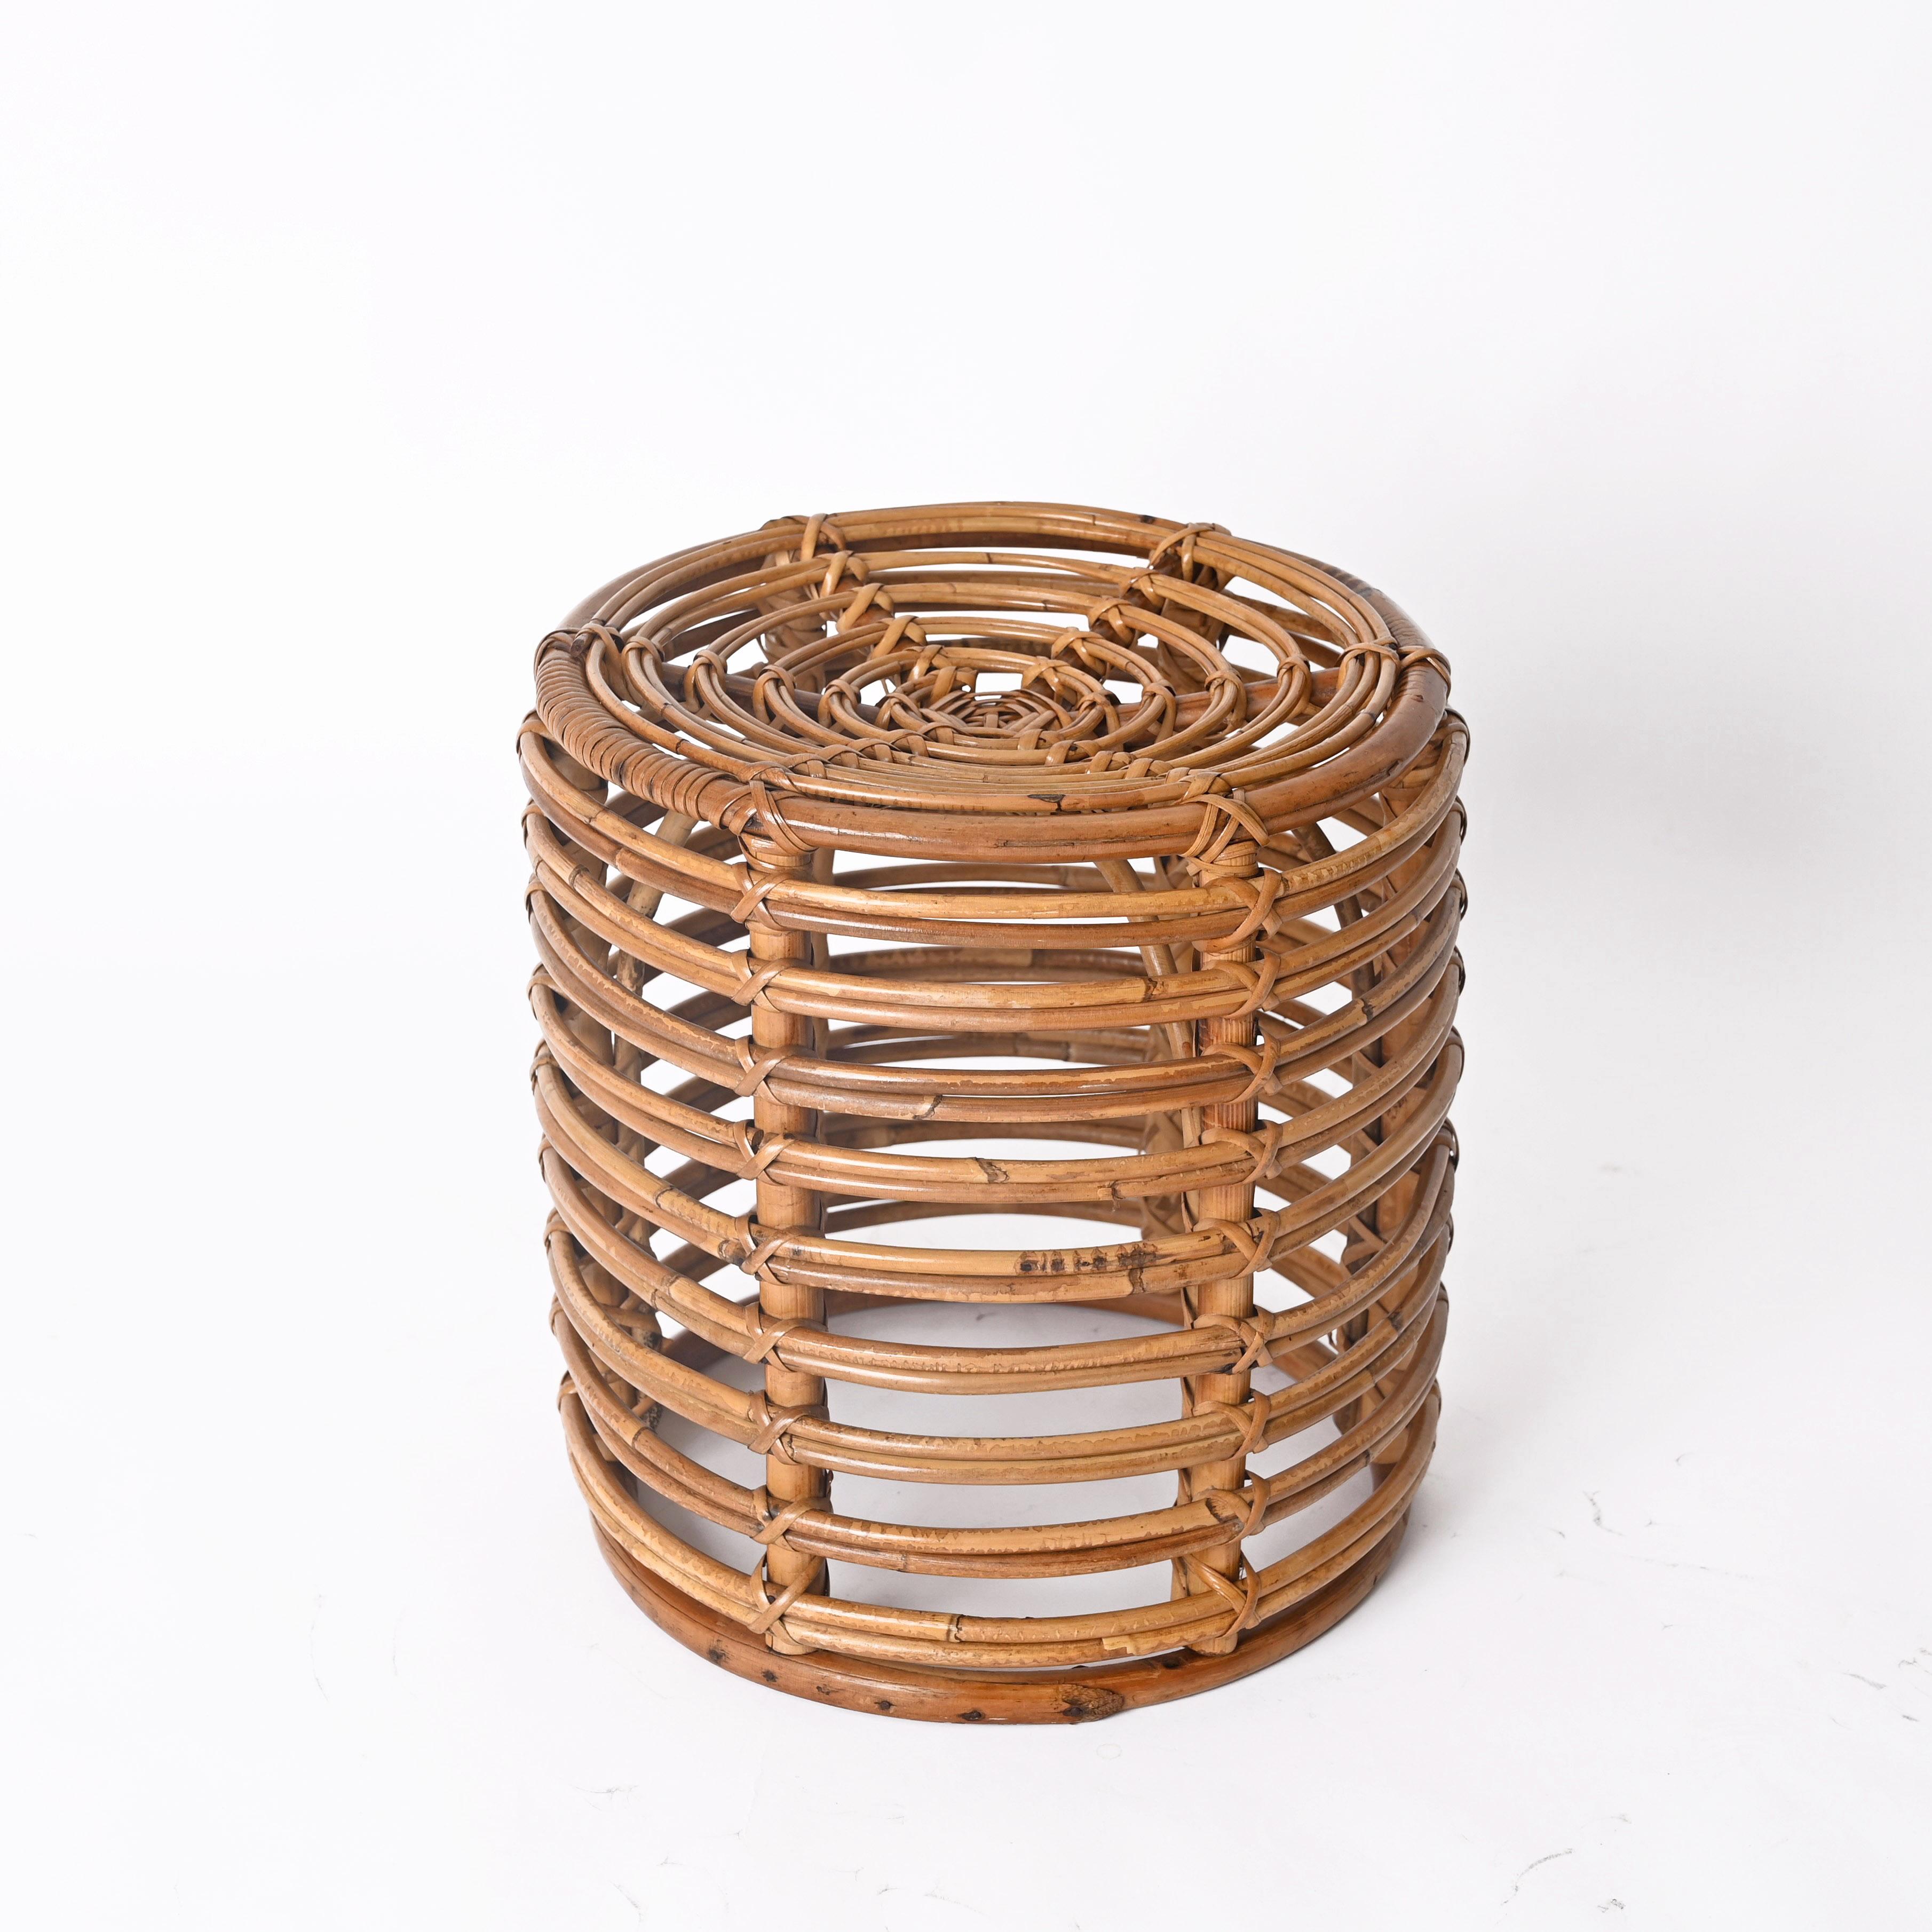 Midcentury Tito Agnoli Rattan and Wicker Round Pouf Stool, Italy, 1970s For Sale 3